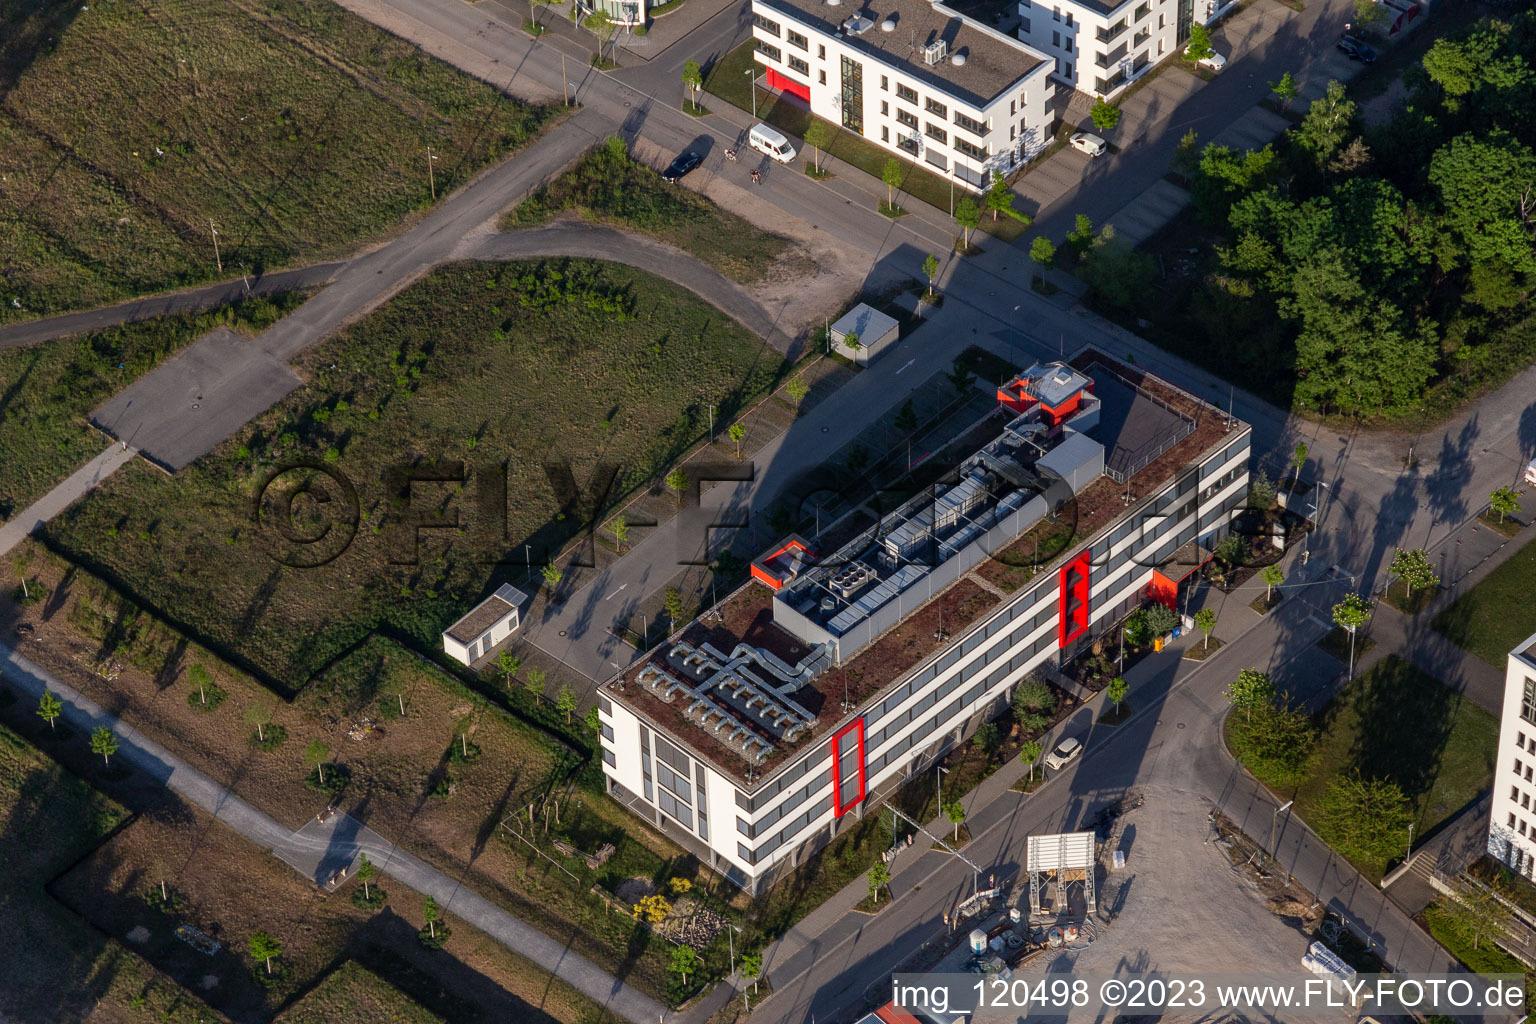 Aerial view of Microchip Technoloy in the technology park in the district Rintheim in Karlsruhe in the state Baden-Wuerttemberg, Germany